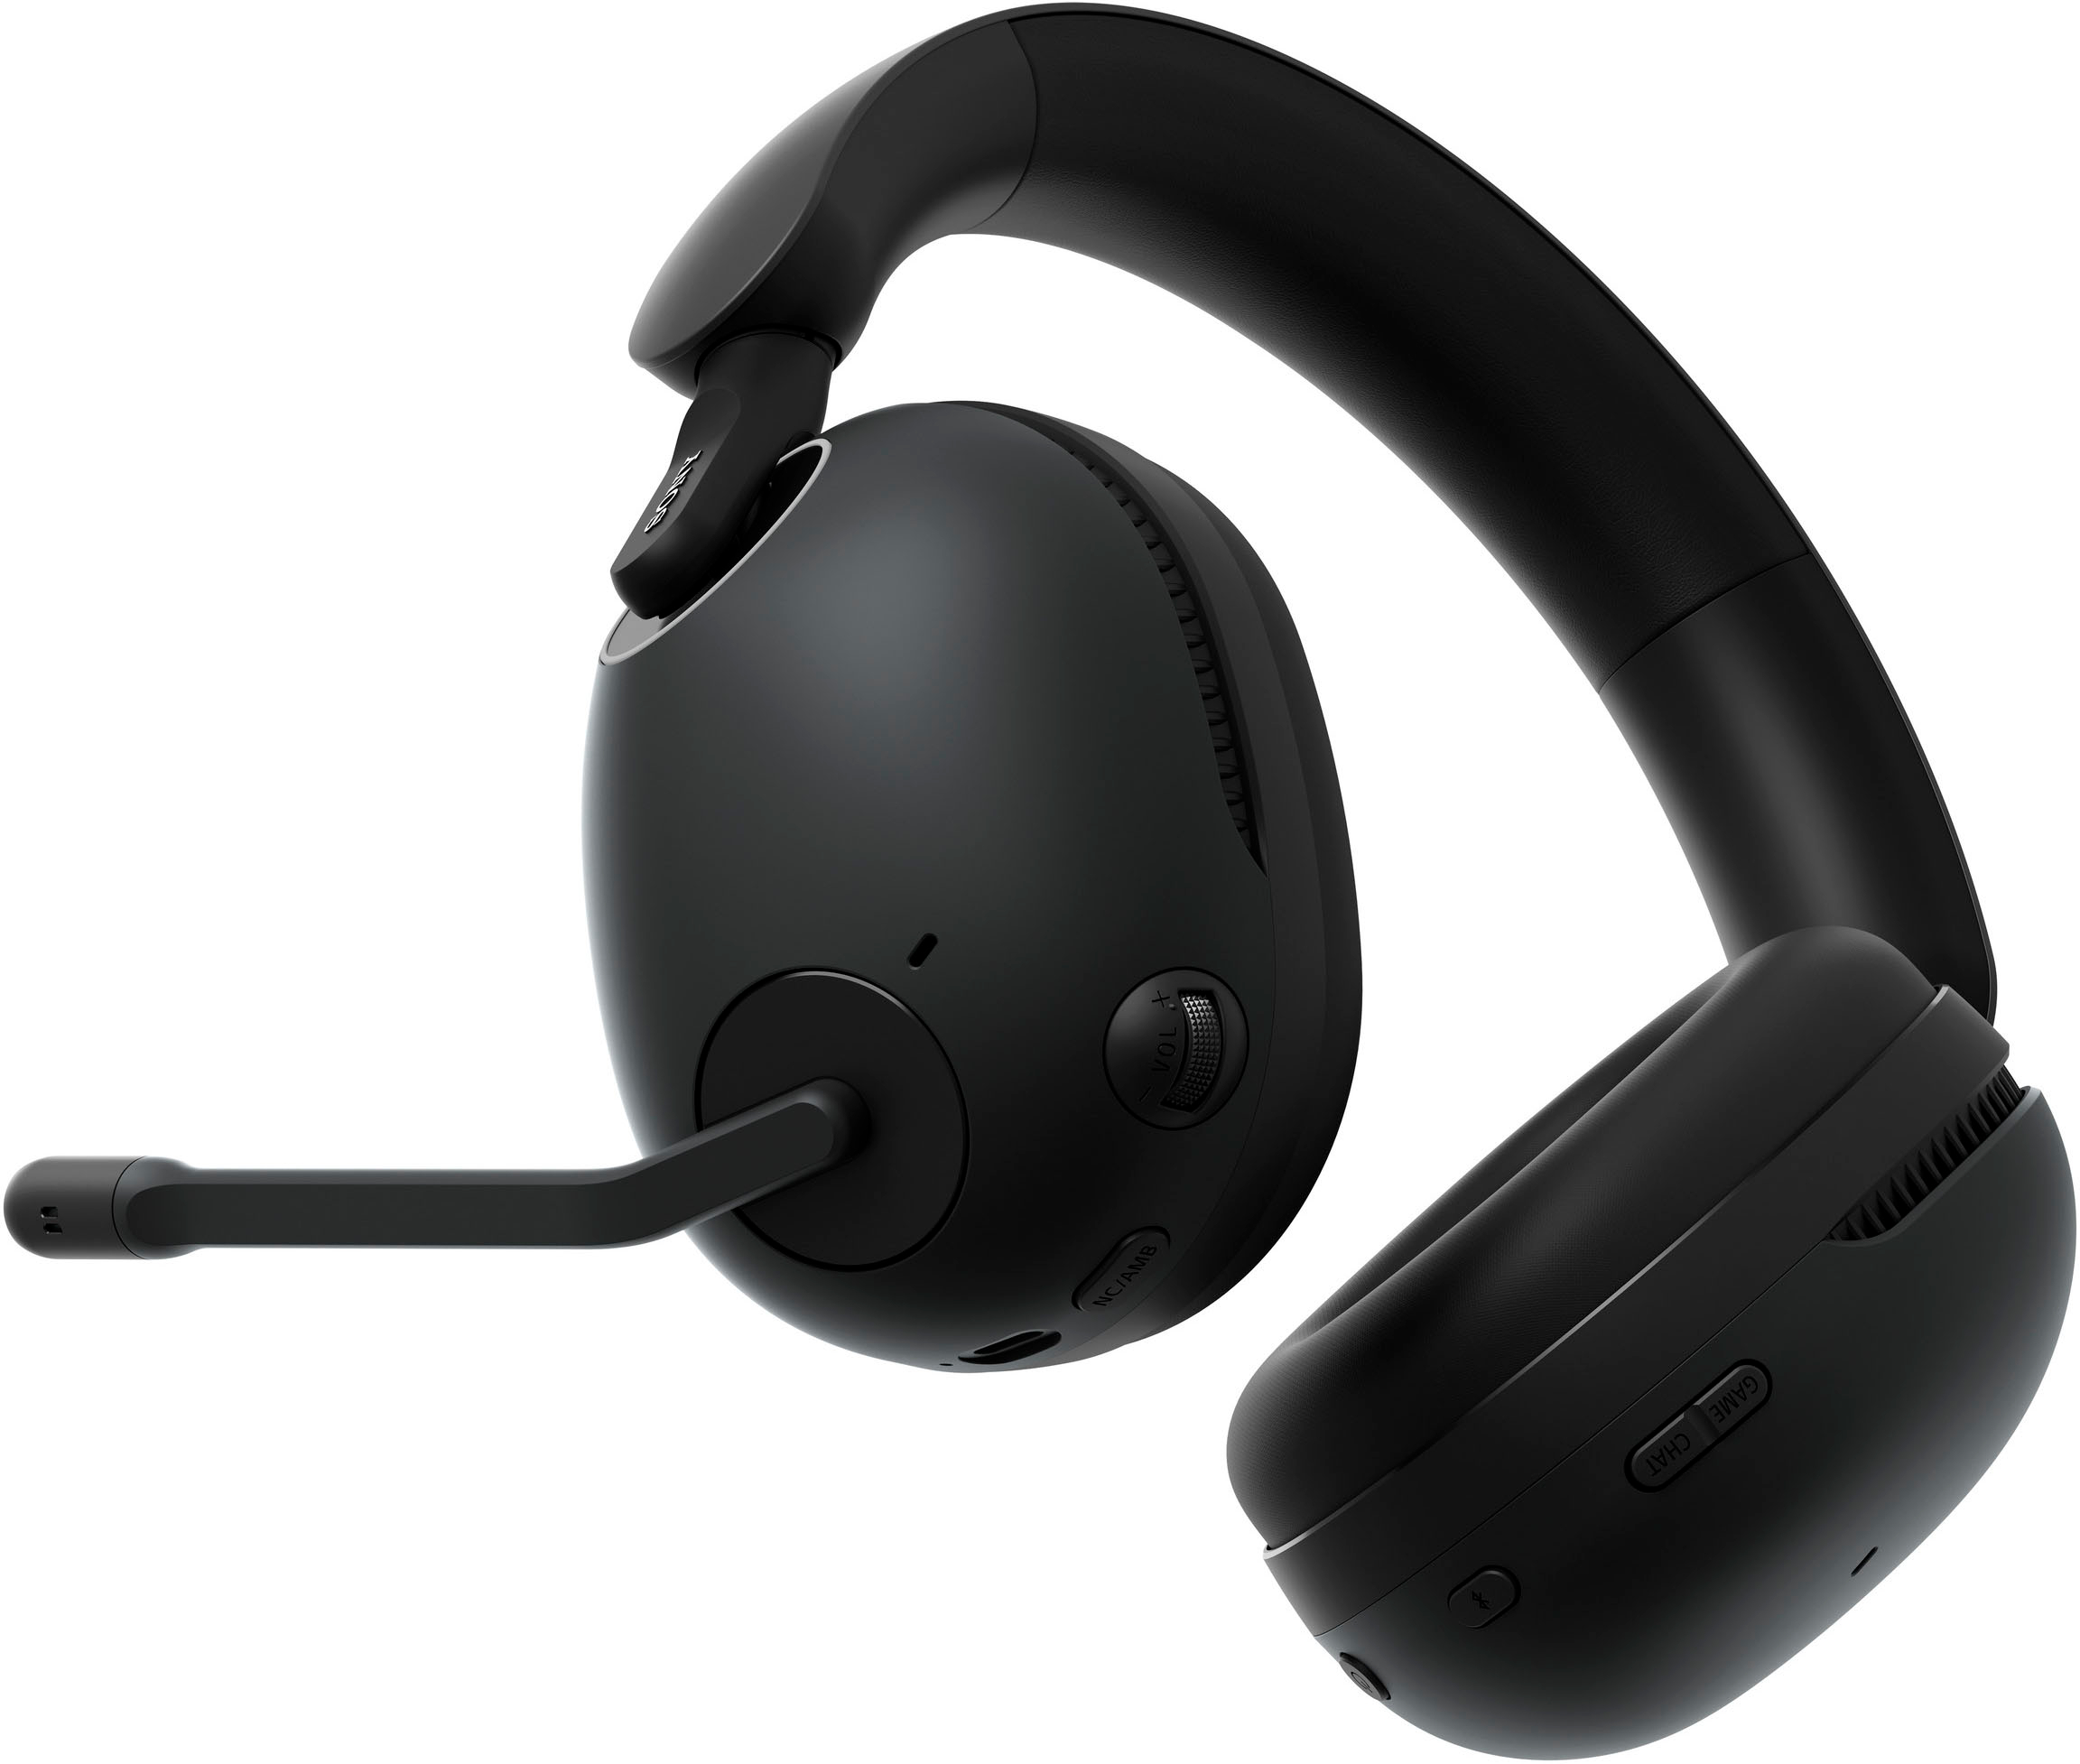 Sony Inzone H9 gaming headset review: All of the XM5 goodness for